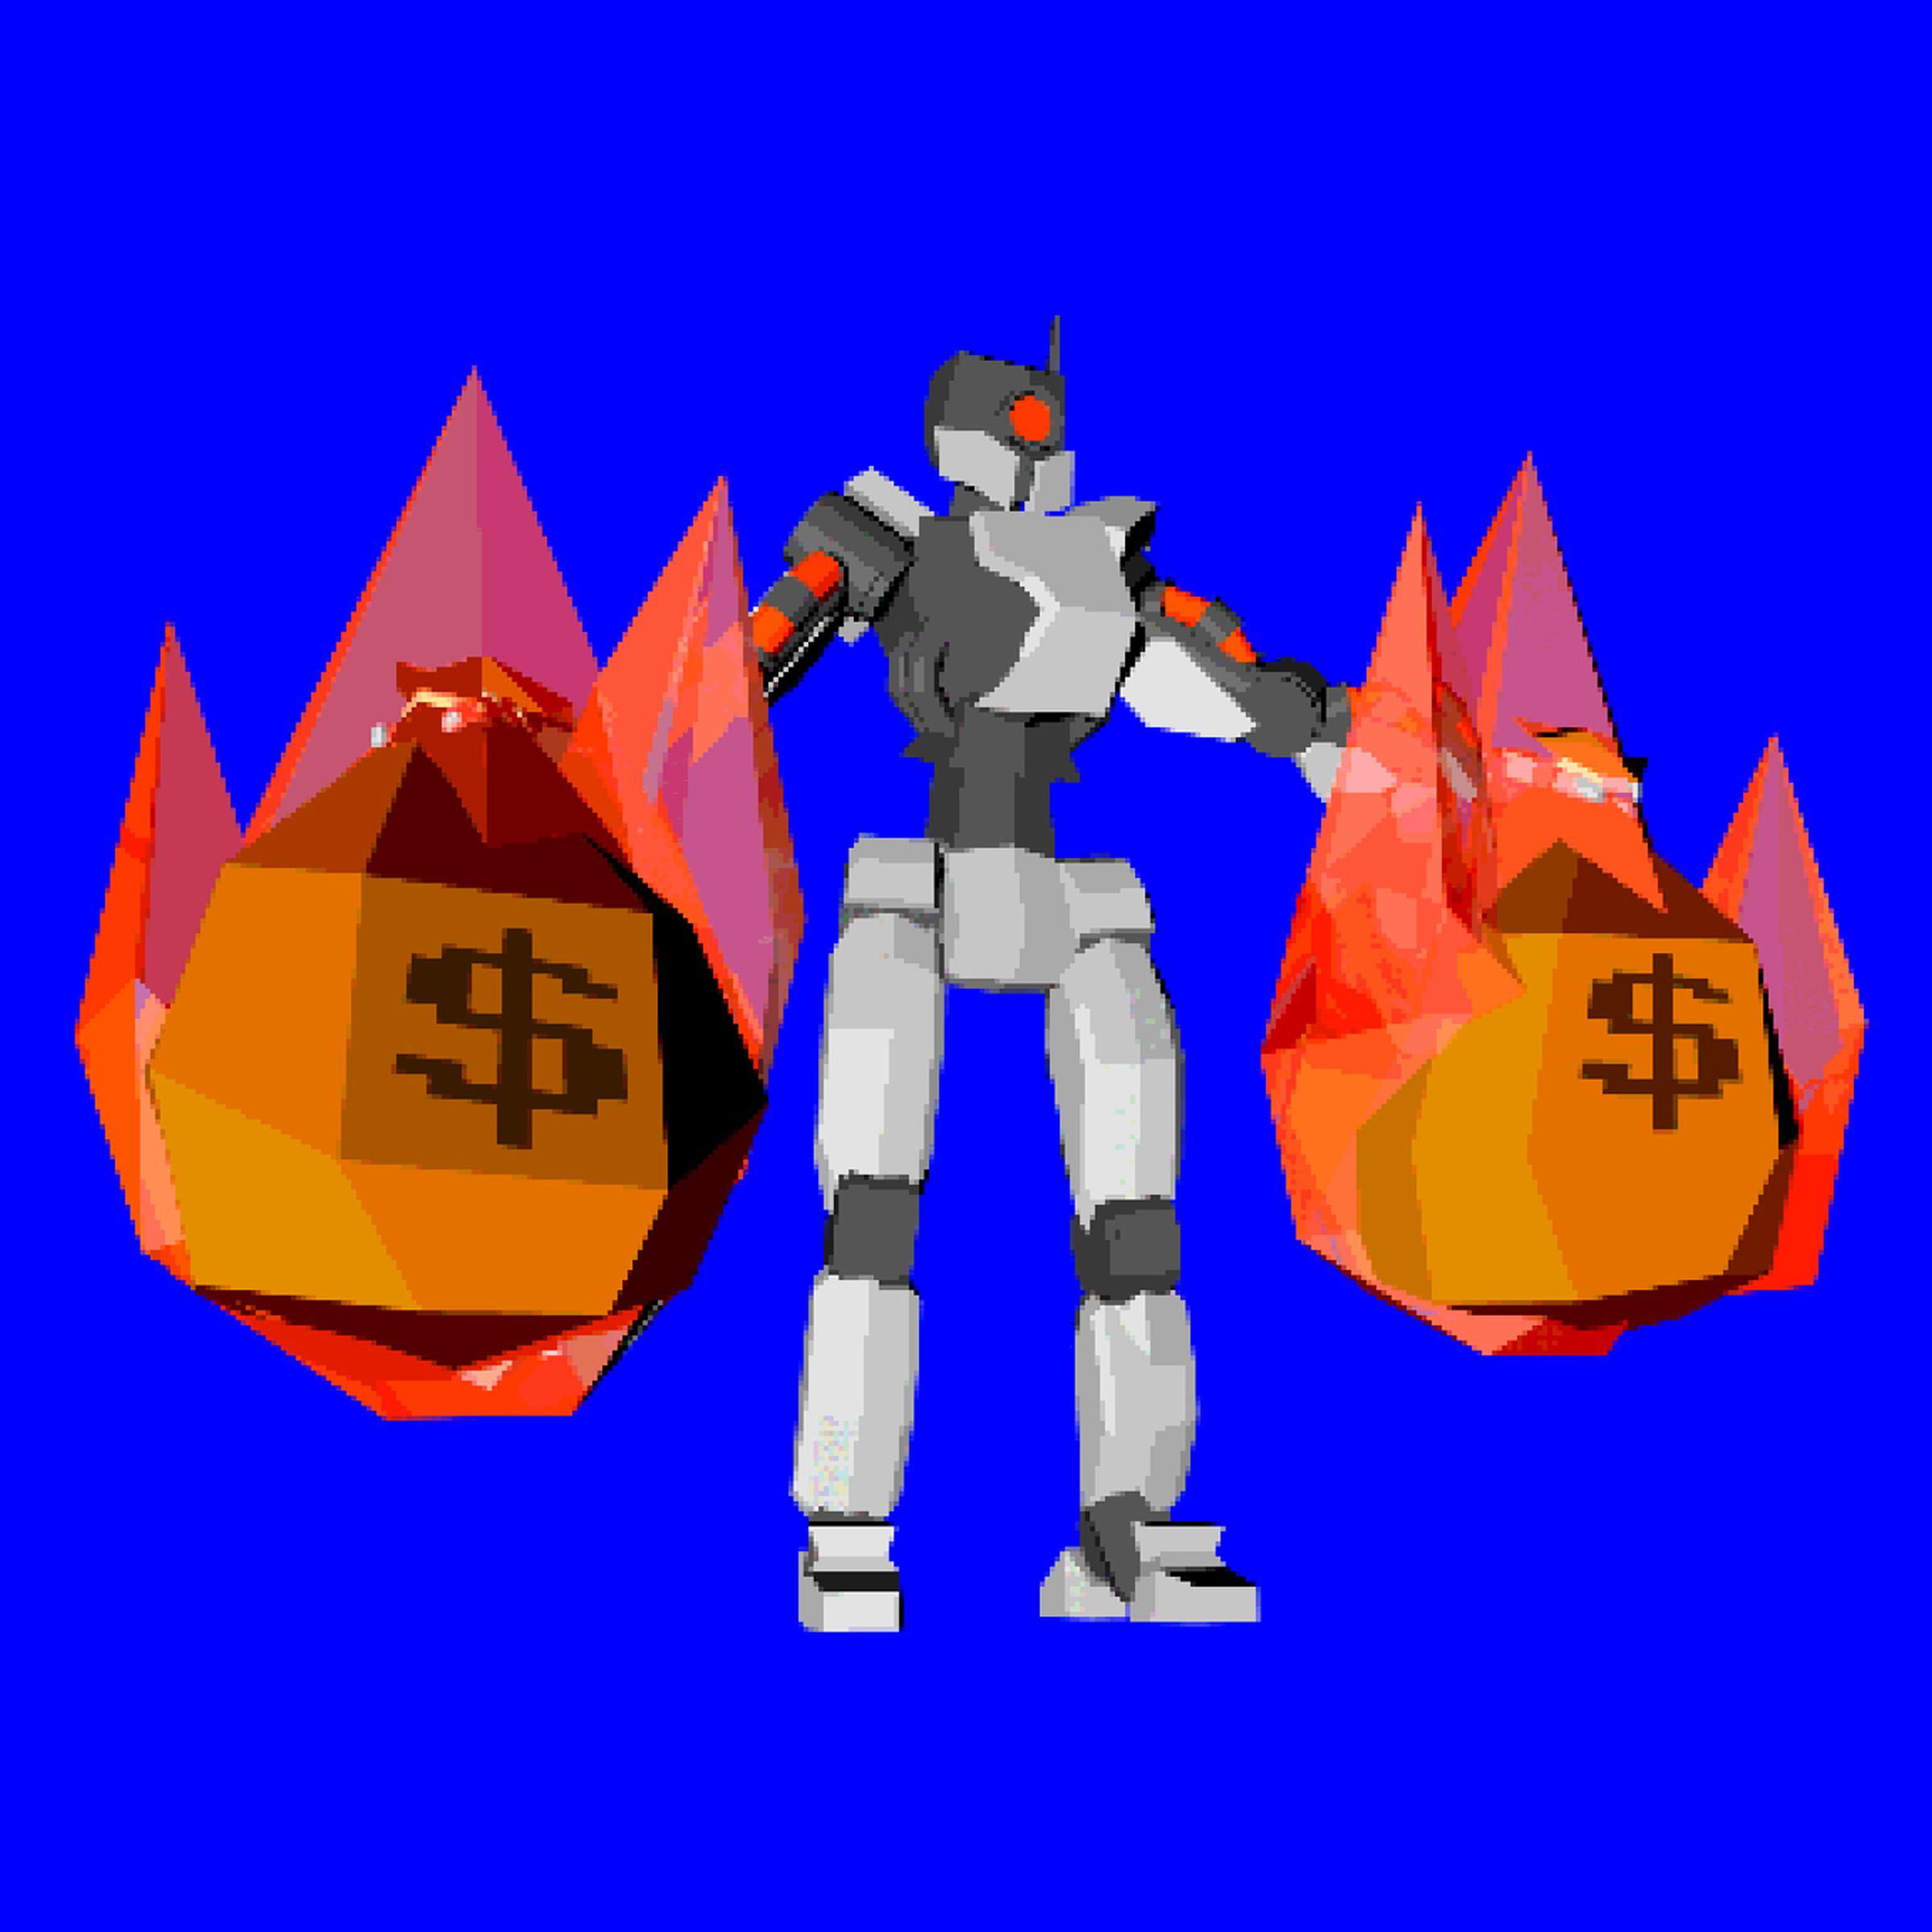 3D illustration of a robot holding two bags of money on fire.